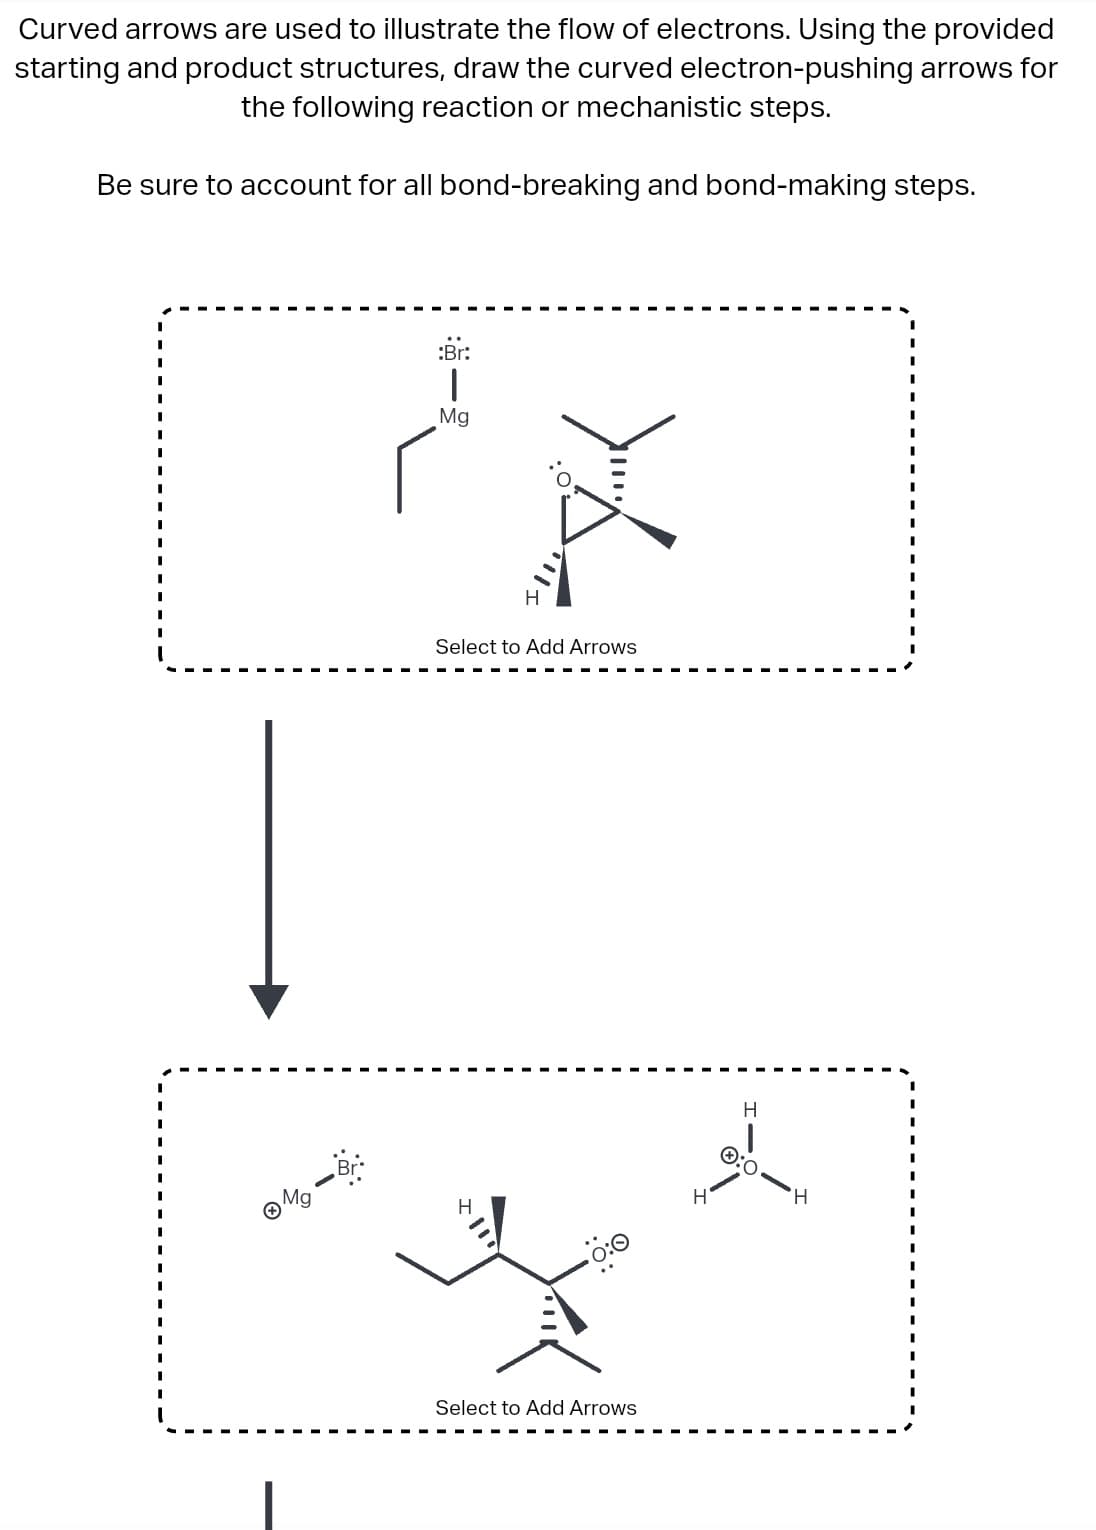 Curved arrows are used to illustrate the flow of electrons. Using the provided
starting and product structures, draw the curved electron-pushing arrows for
the following reaction or mechanistic steps.
Be sure to account for all bond-breaking and bond-making steps.
:Br:
|
Mg
¿
ⒸM₂-B
>:<
Select to Add Arrows
H
Select to Add Arrows
H
H
H